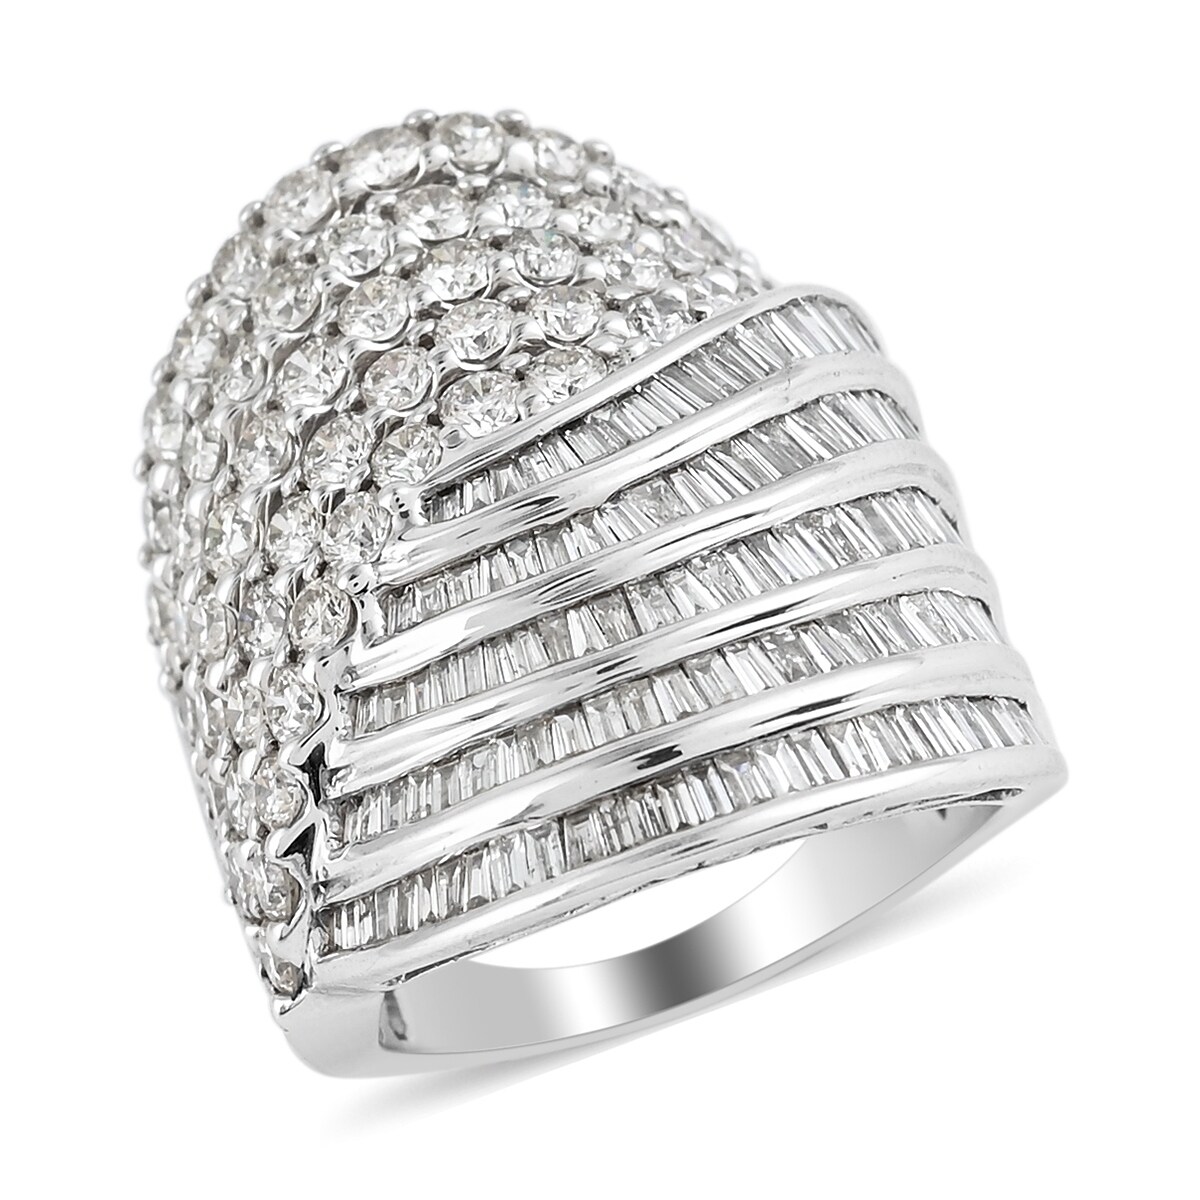 Shop LC Delivering Joy Cocktail Ring Stainless Steel Baguette White Glass Jewelry for Women Size 10 Cttw 9 